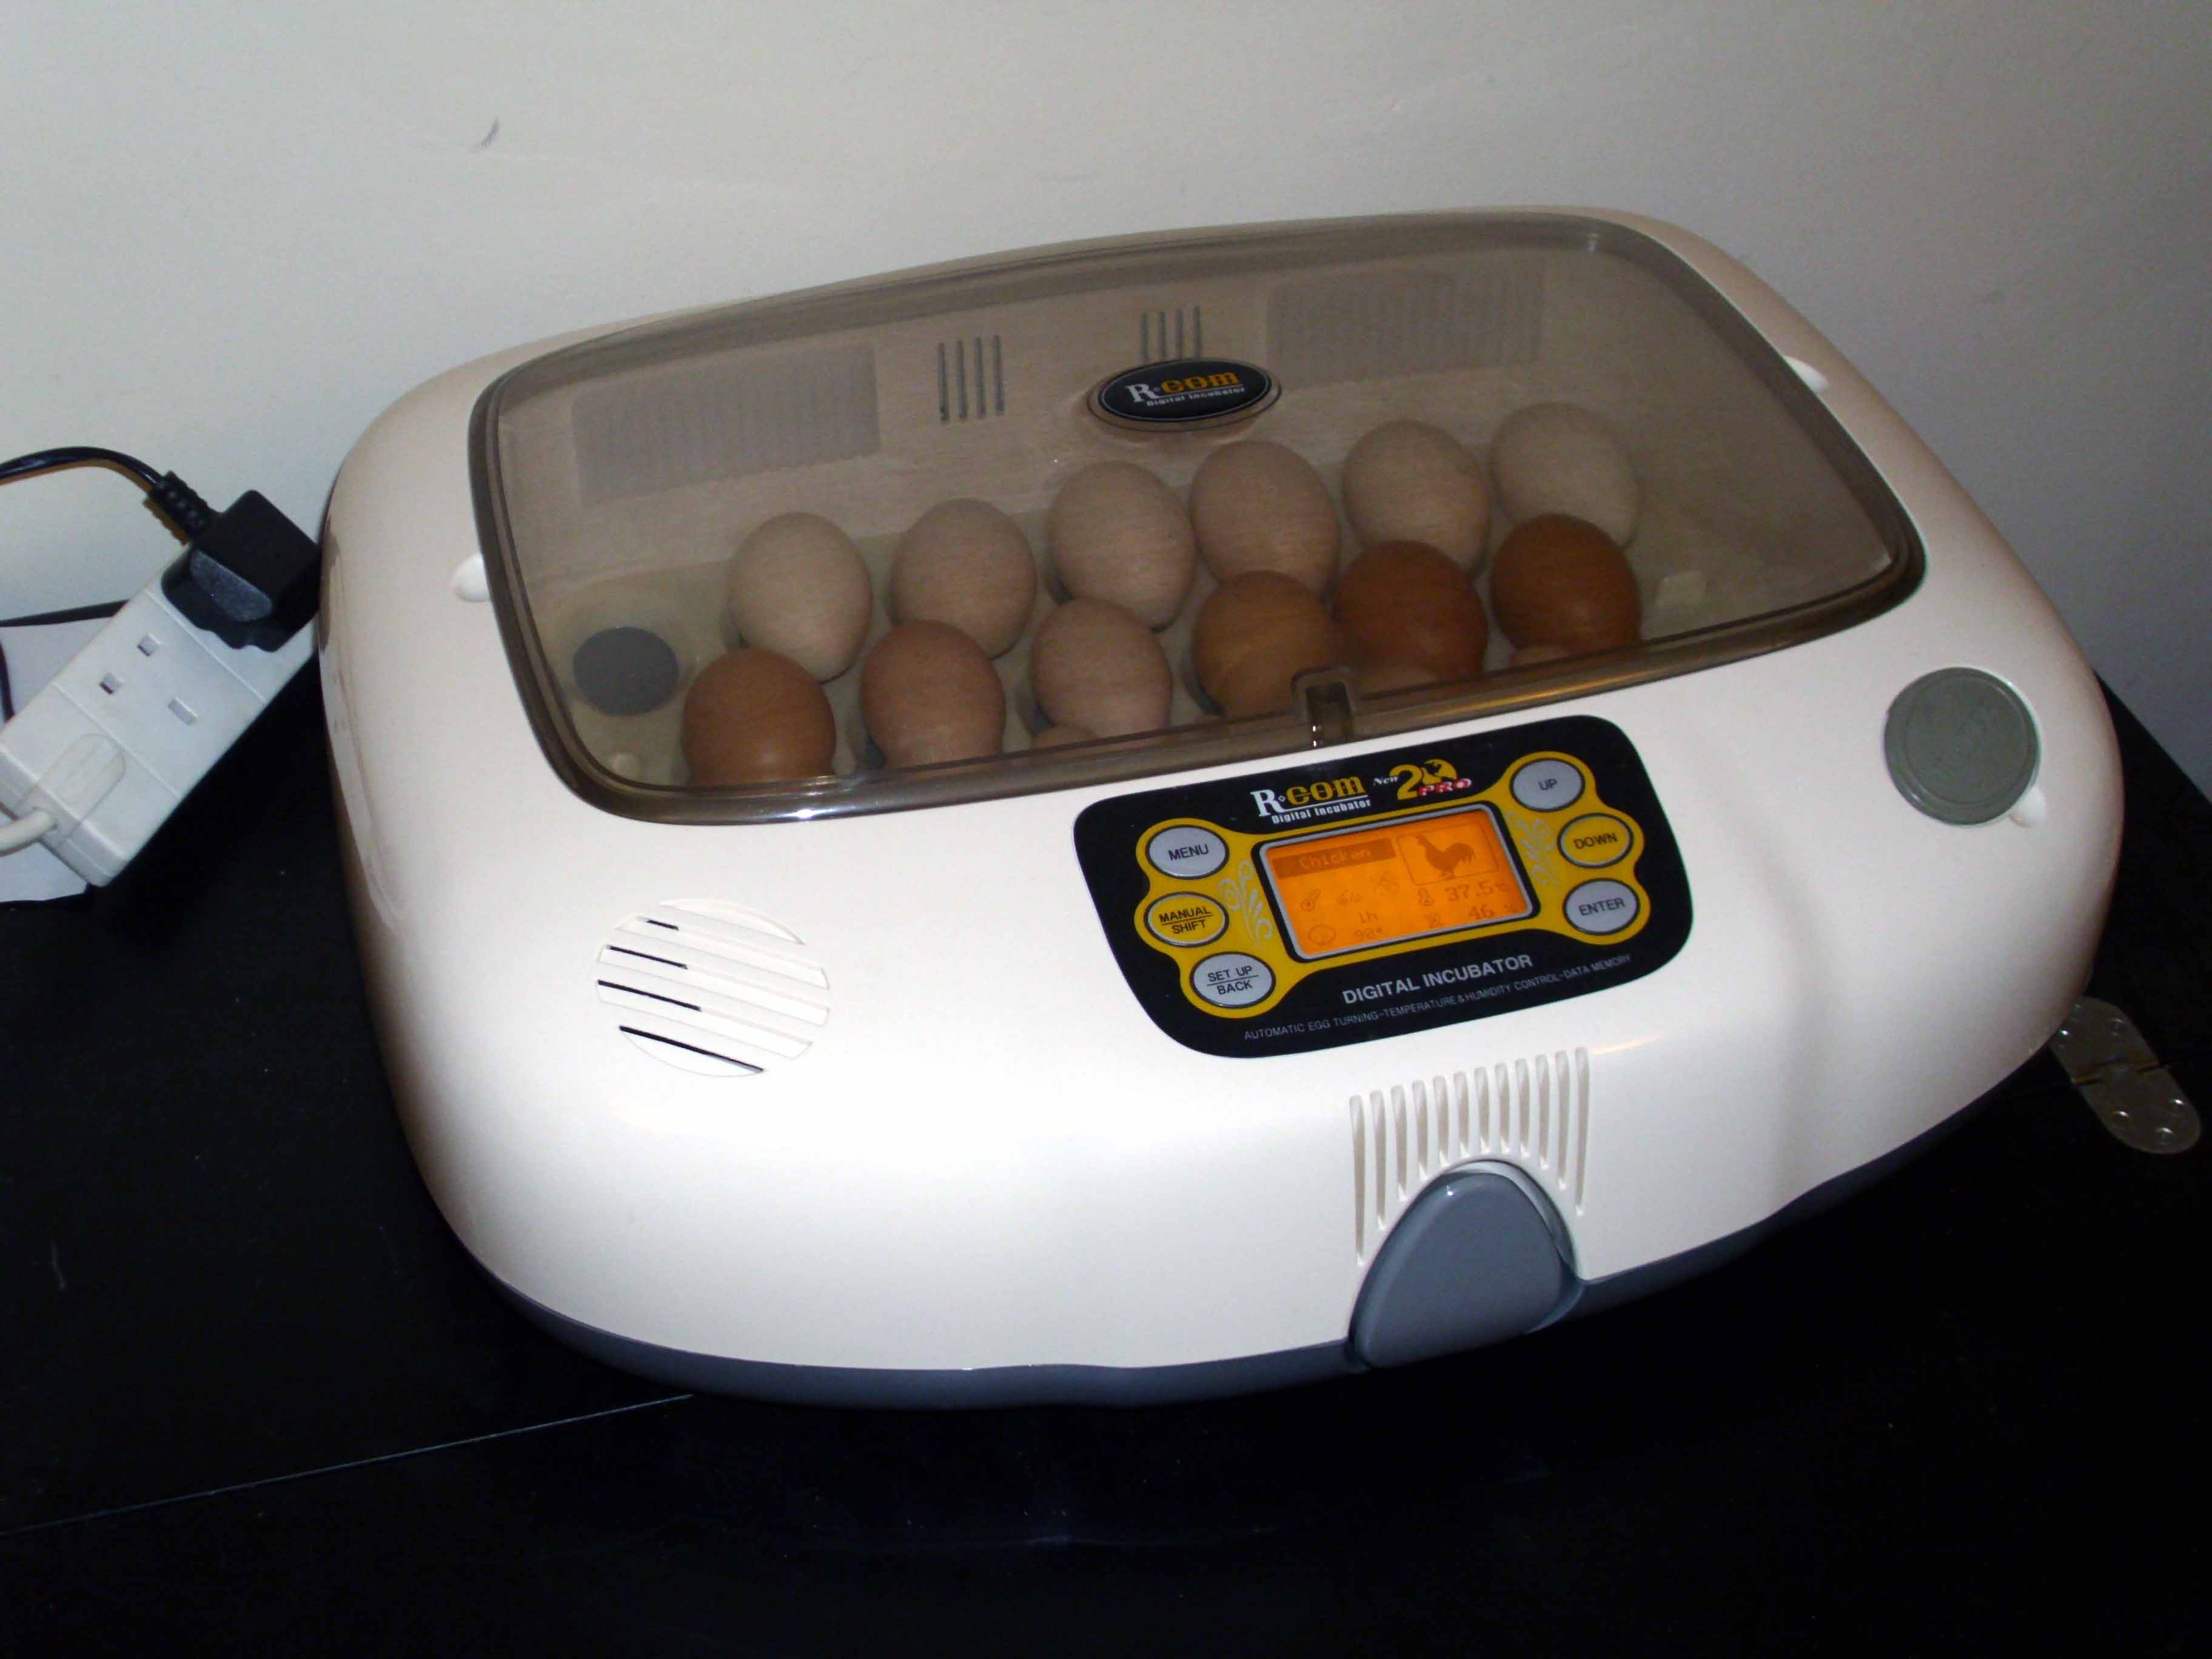 used egg incubator for sale in nh